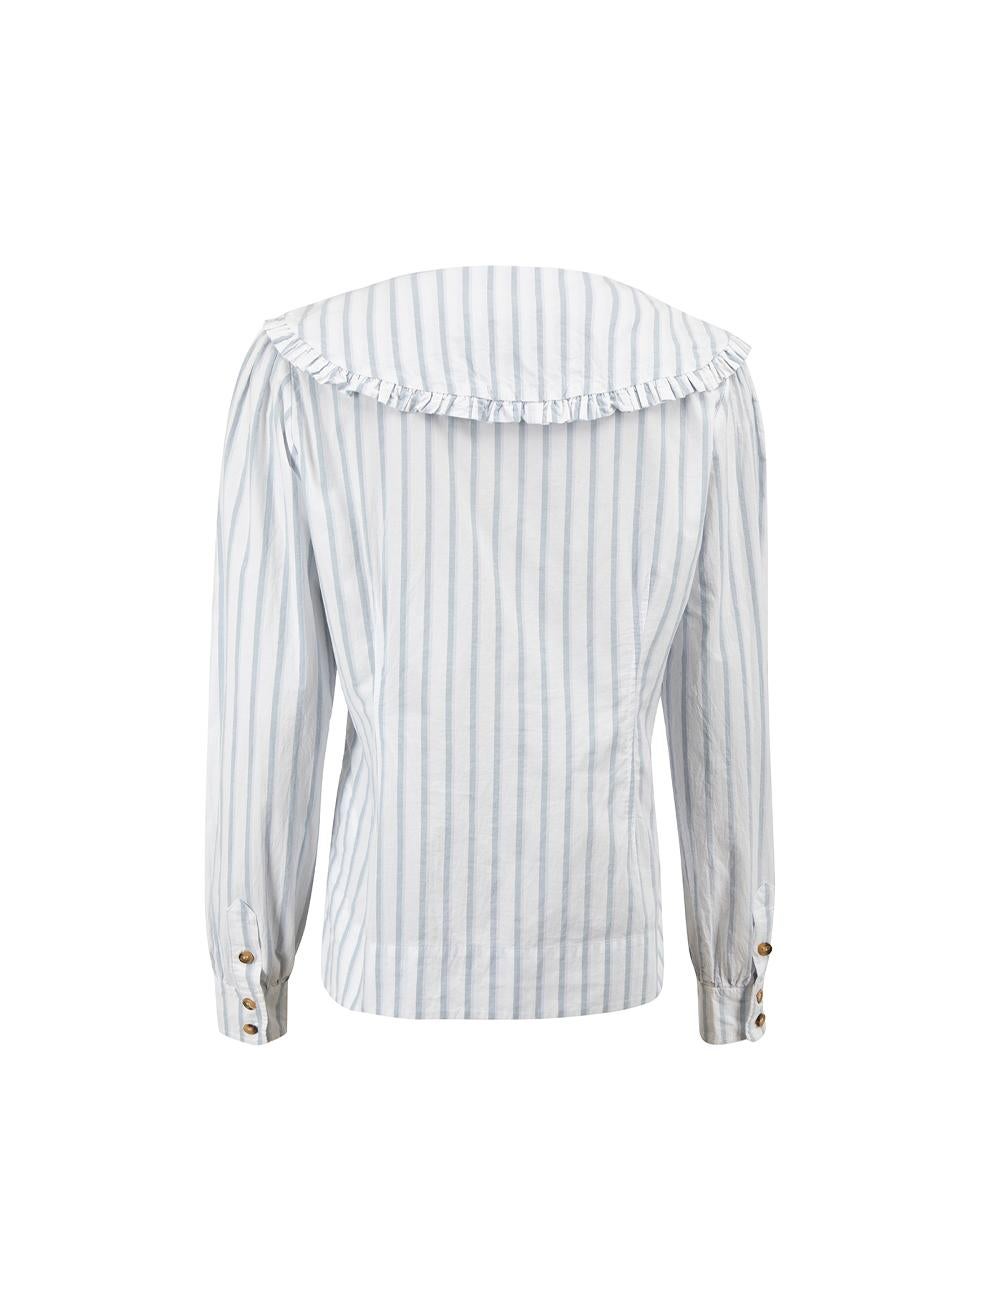 Ganni Blue & White Striped Oversized Collar Blouse Size L In Good Condition In London, GB